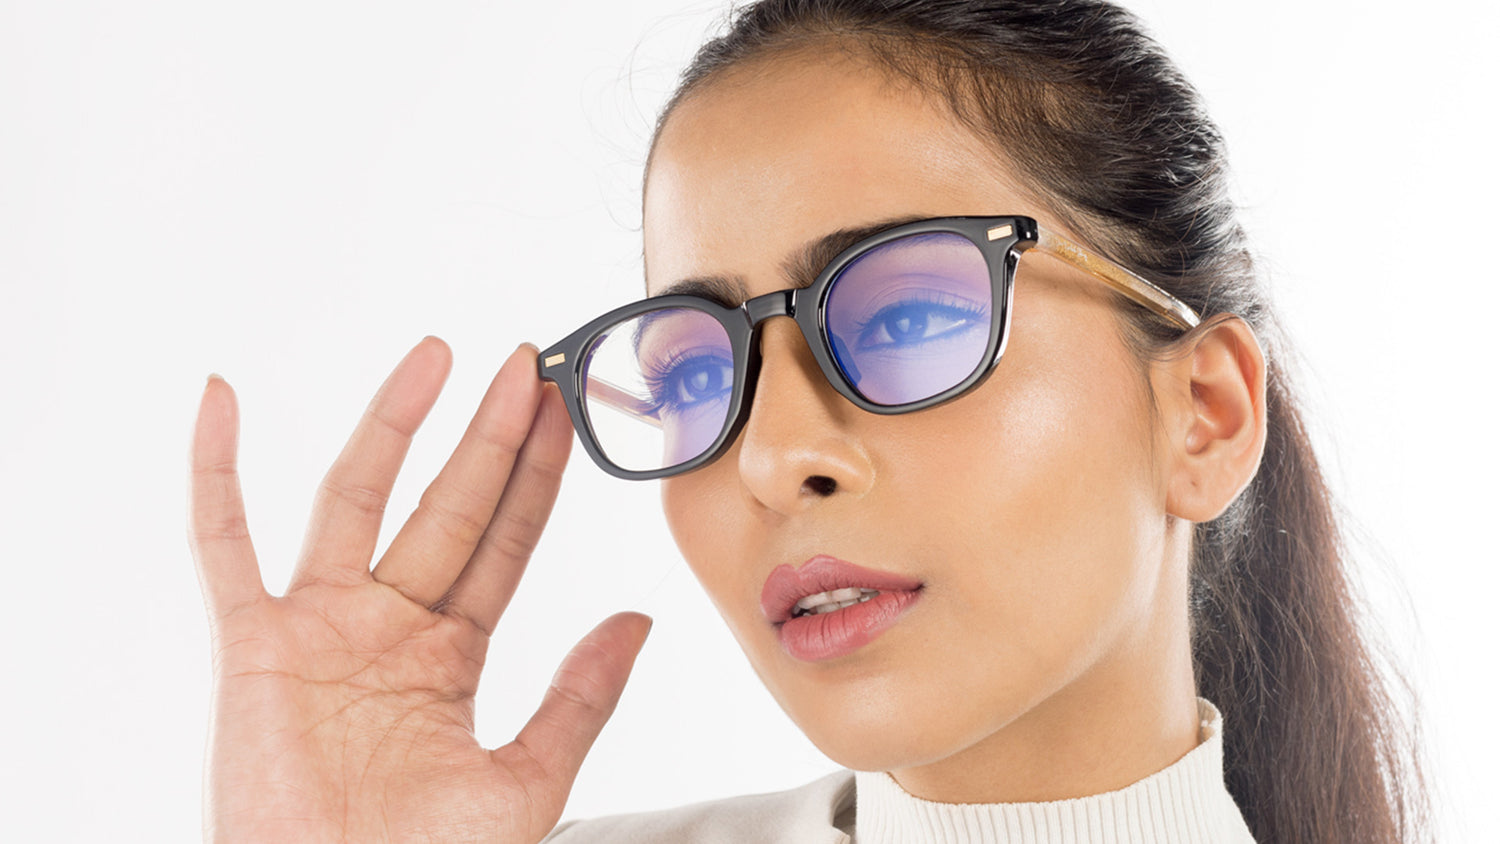 Top 5 blue light glasses to protect your eyes